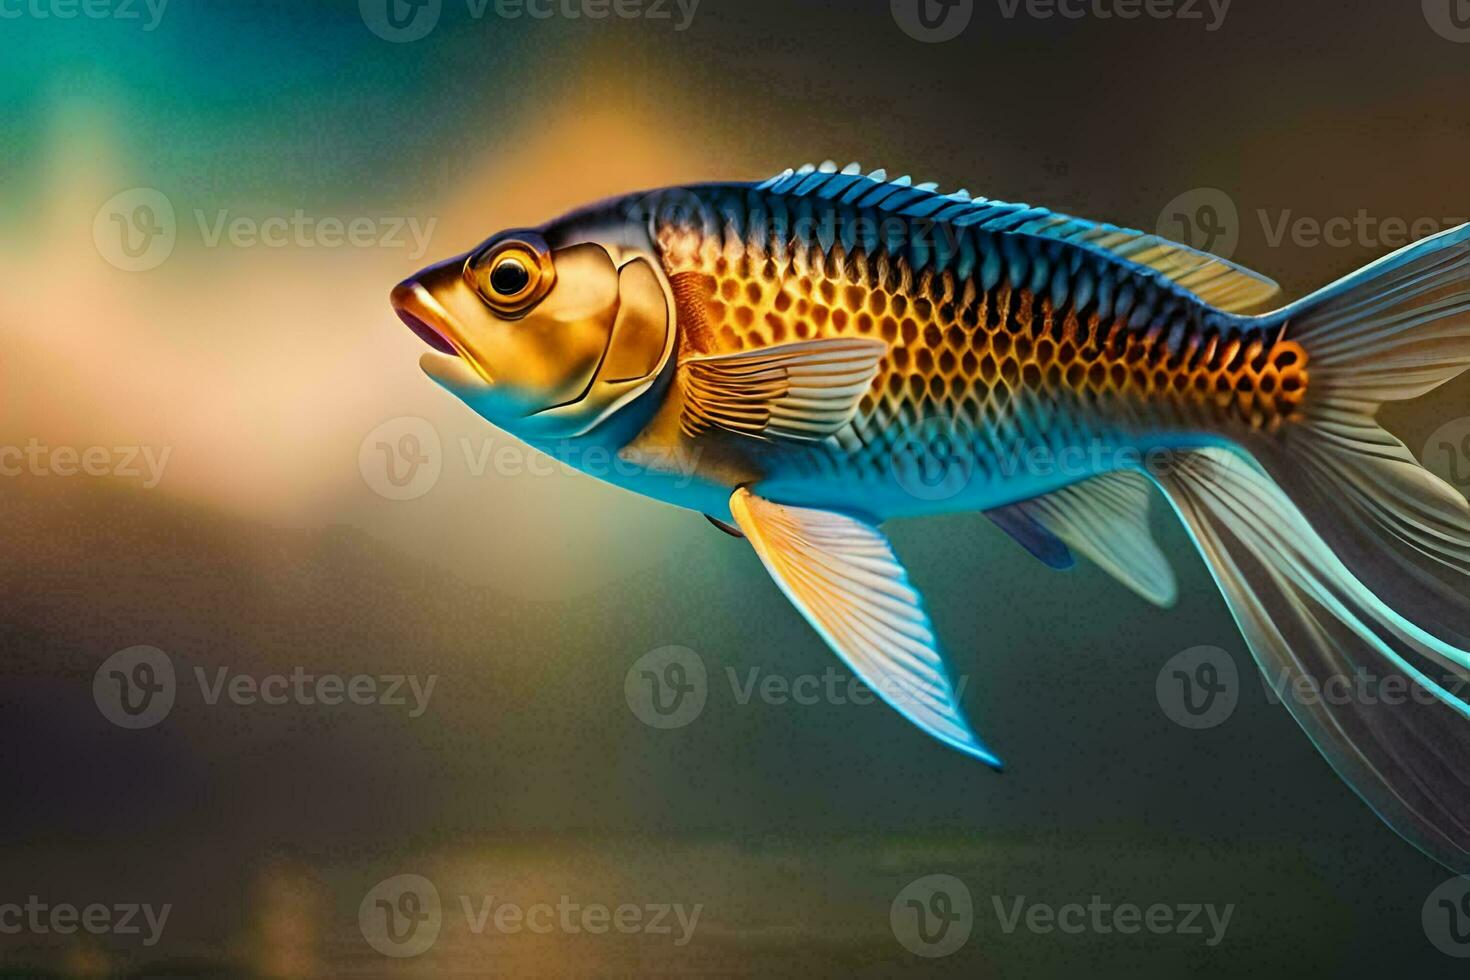 https://static.vecteezy.com/system/resources/previews/031/942/068/non_2x/a-fish-with-long-tail-and-a-blue-body-ai-generated-photo.jpg